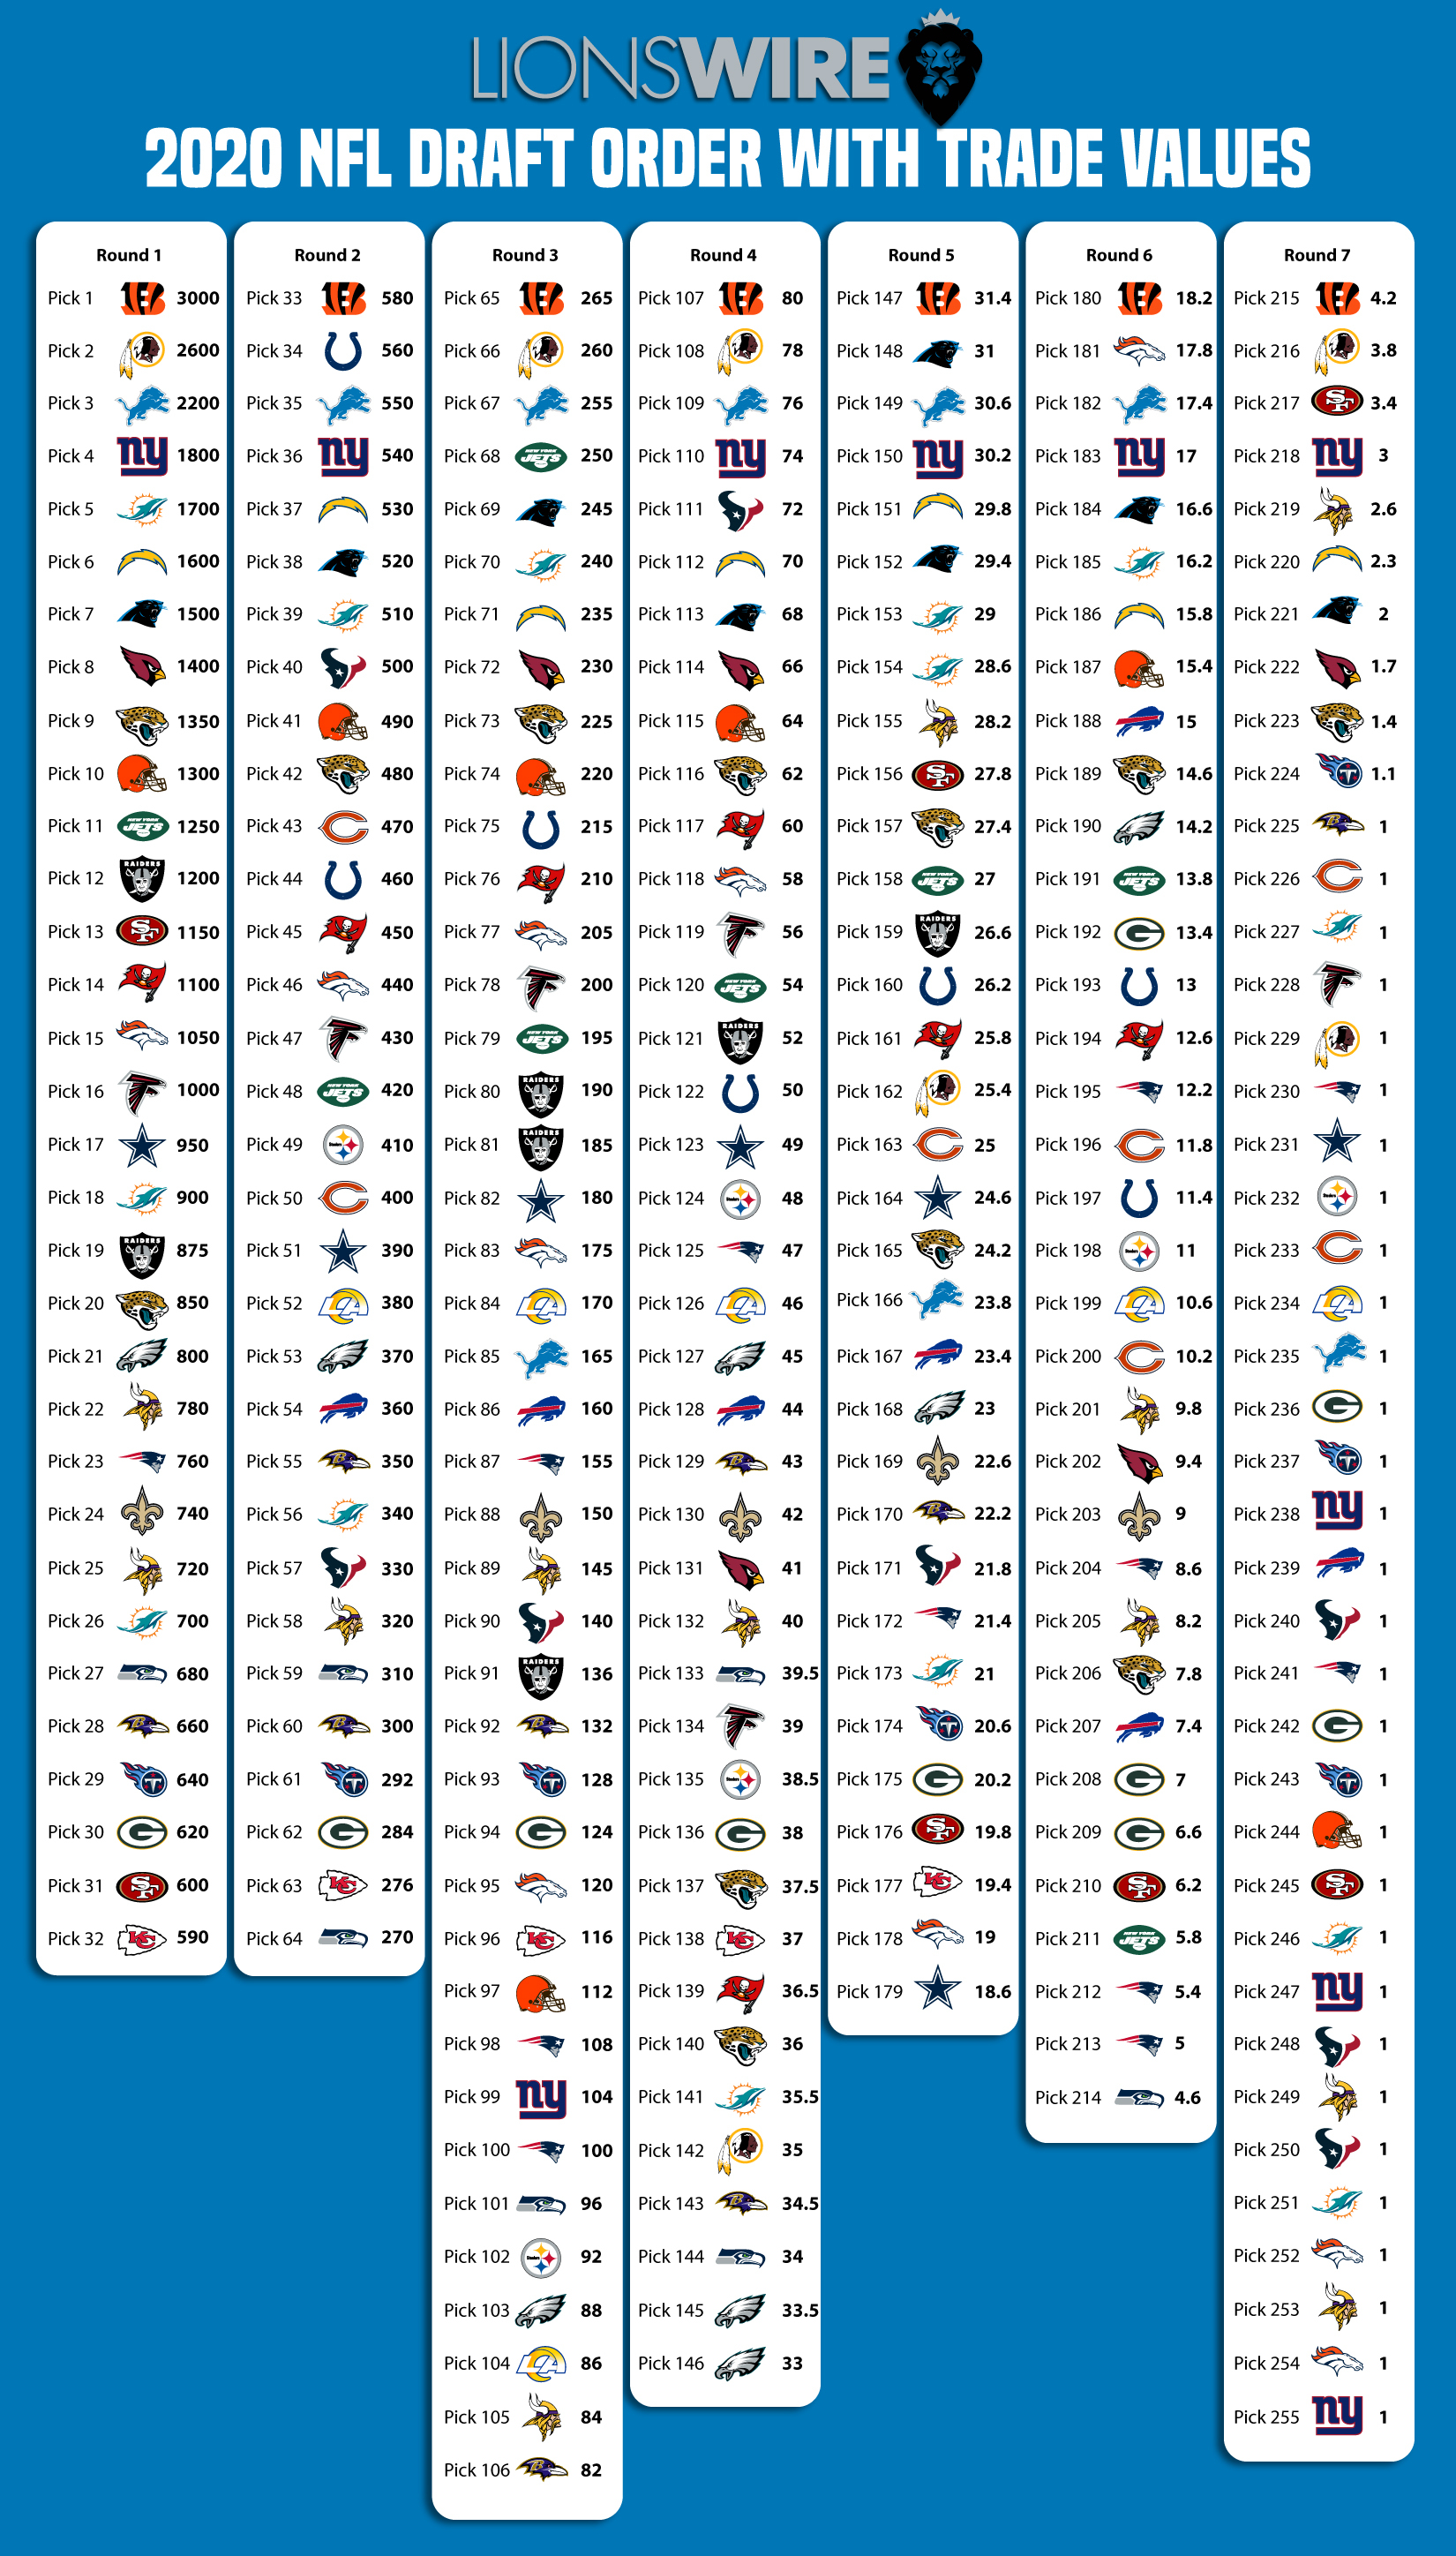 2020 NFL Draft: Final 7-round pick order with Lions trade values